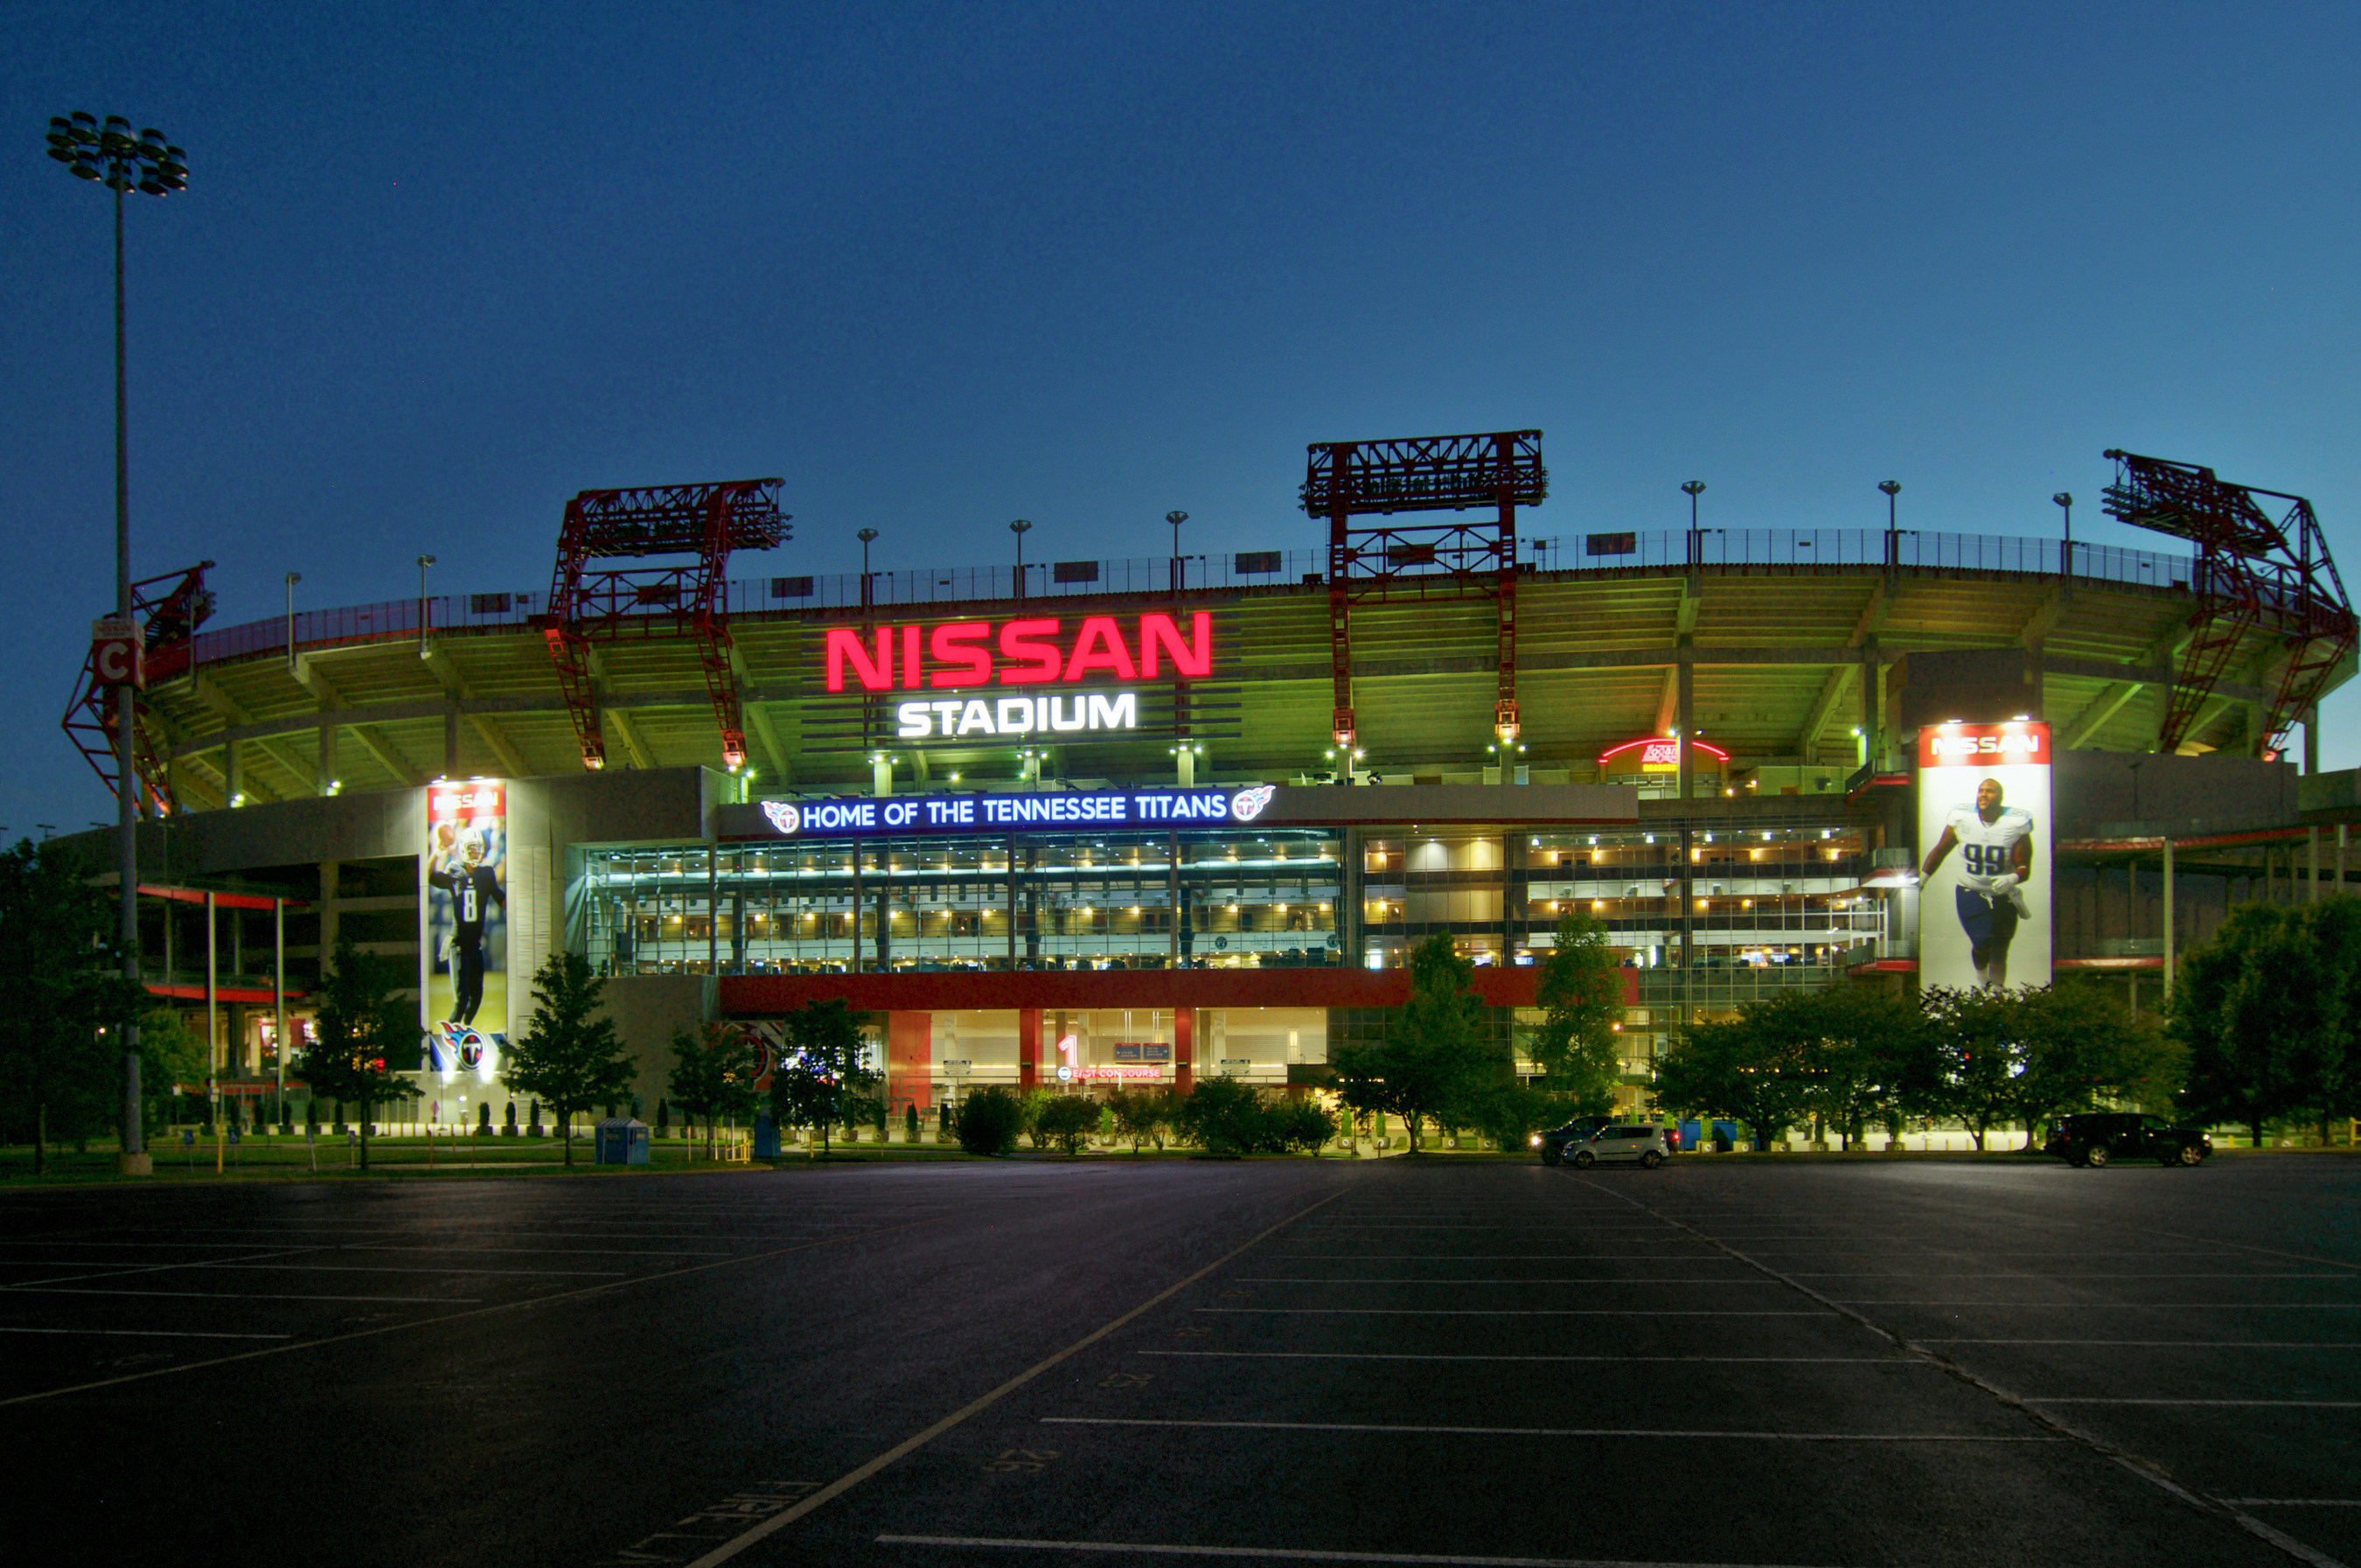 Nissan Stadium, home of the NFL's Tennessee Titans(R), which has installed LG's new highly efficient LED retrofit fixtures as part of the stadium's plans to convert its existing lighting to LED solutions using LG's Sensor Connect High Bays.